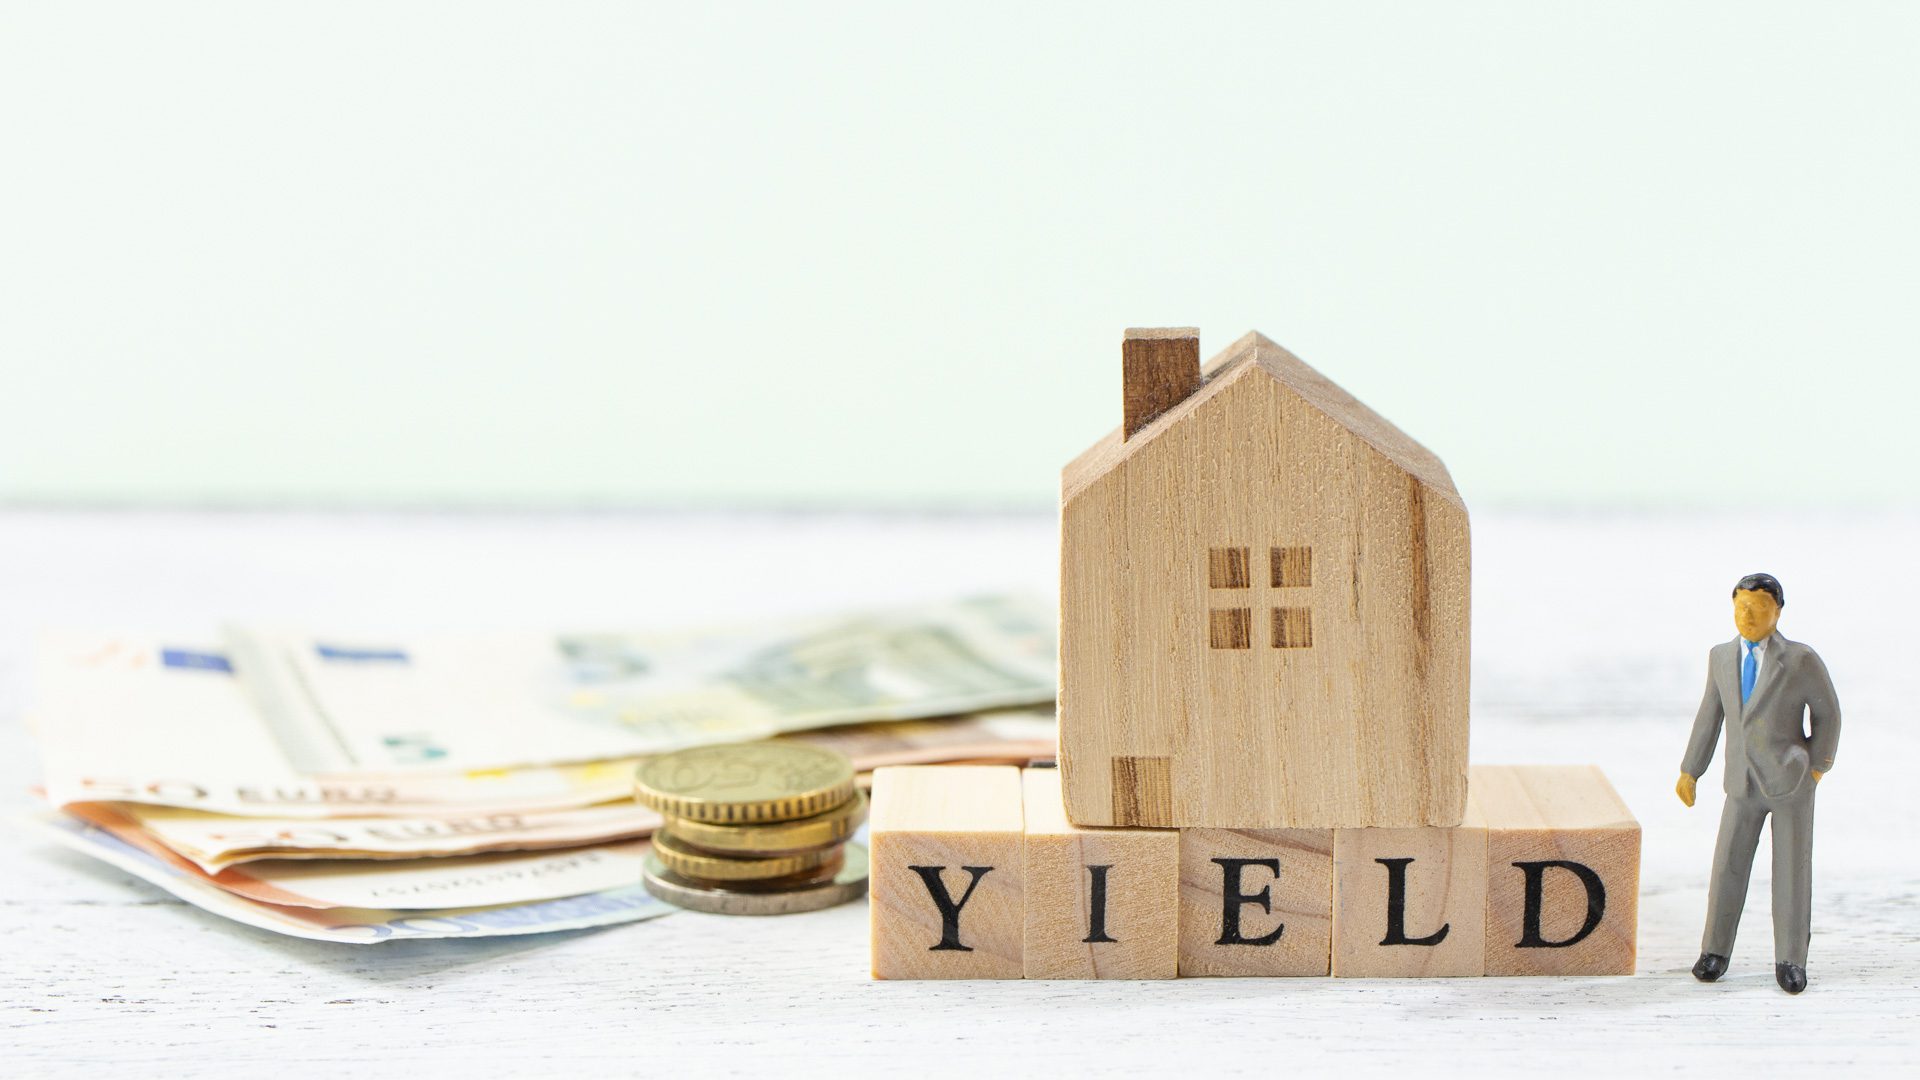 Yield calculation essential for real estate management